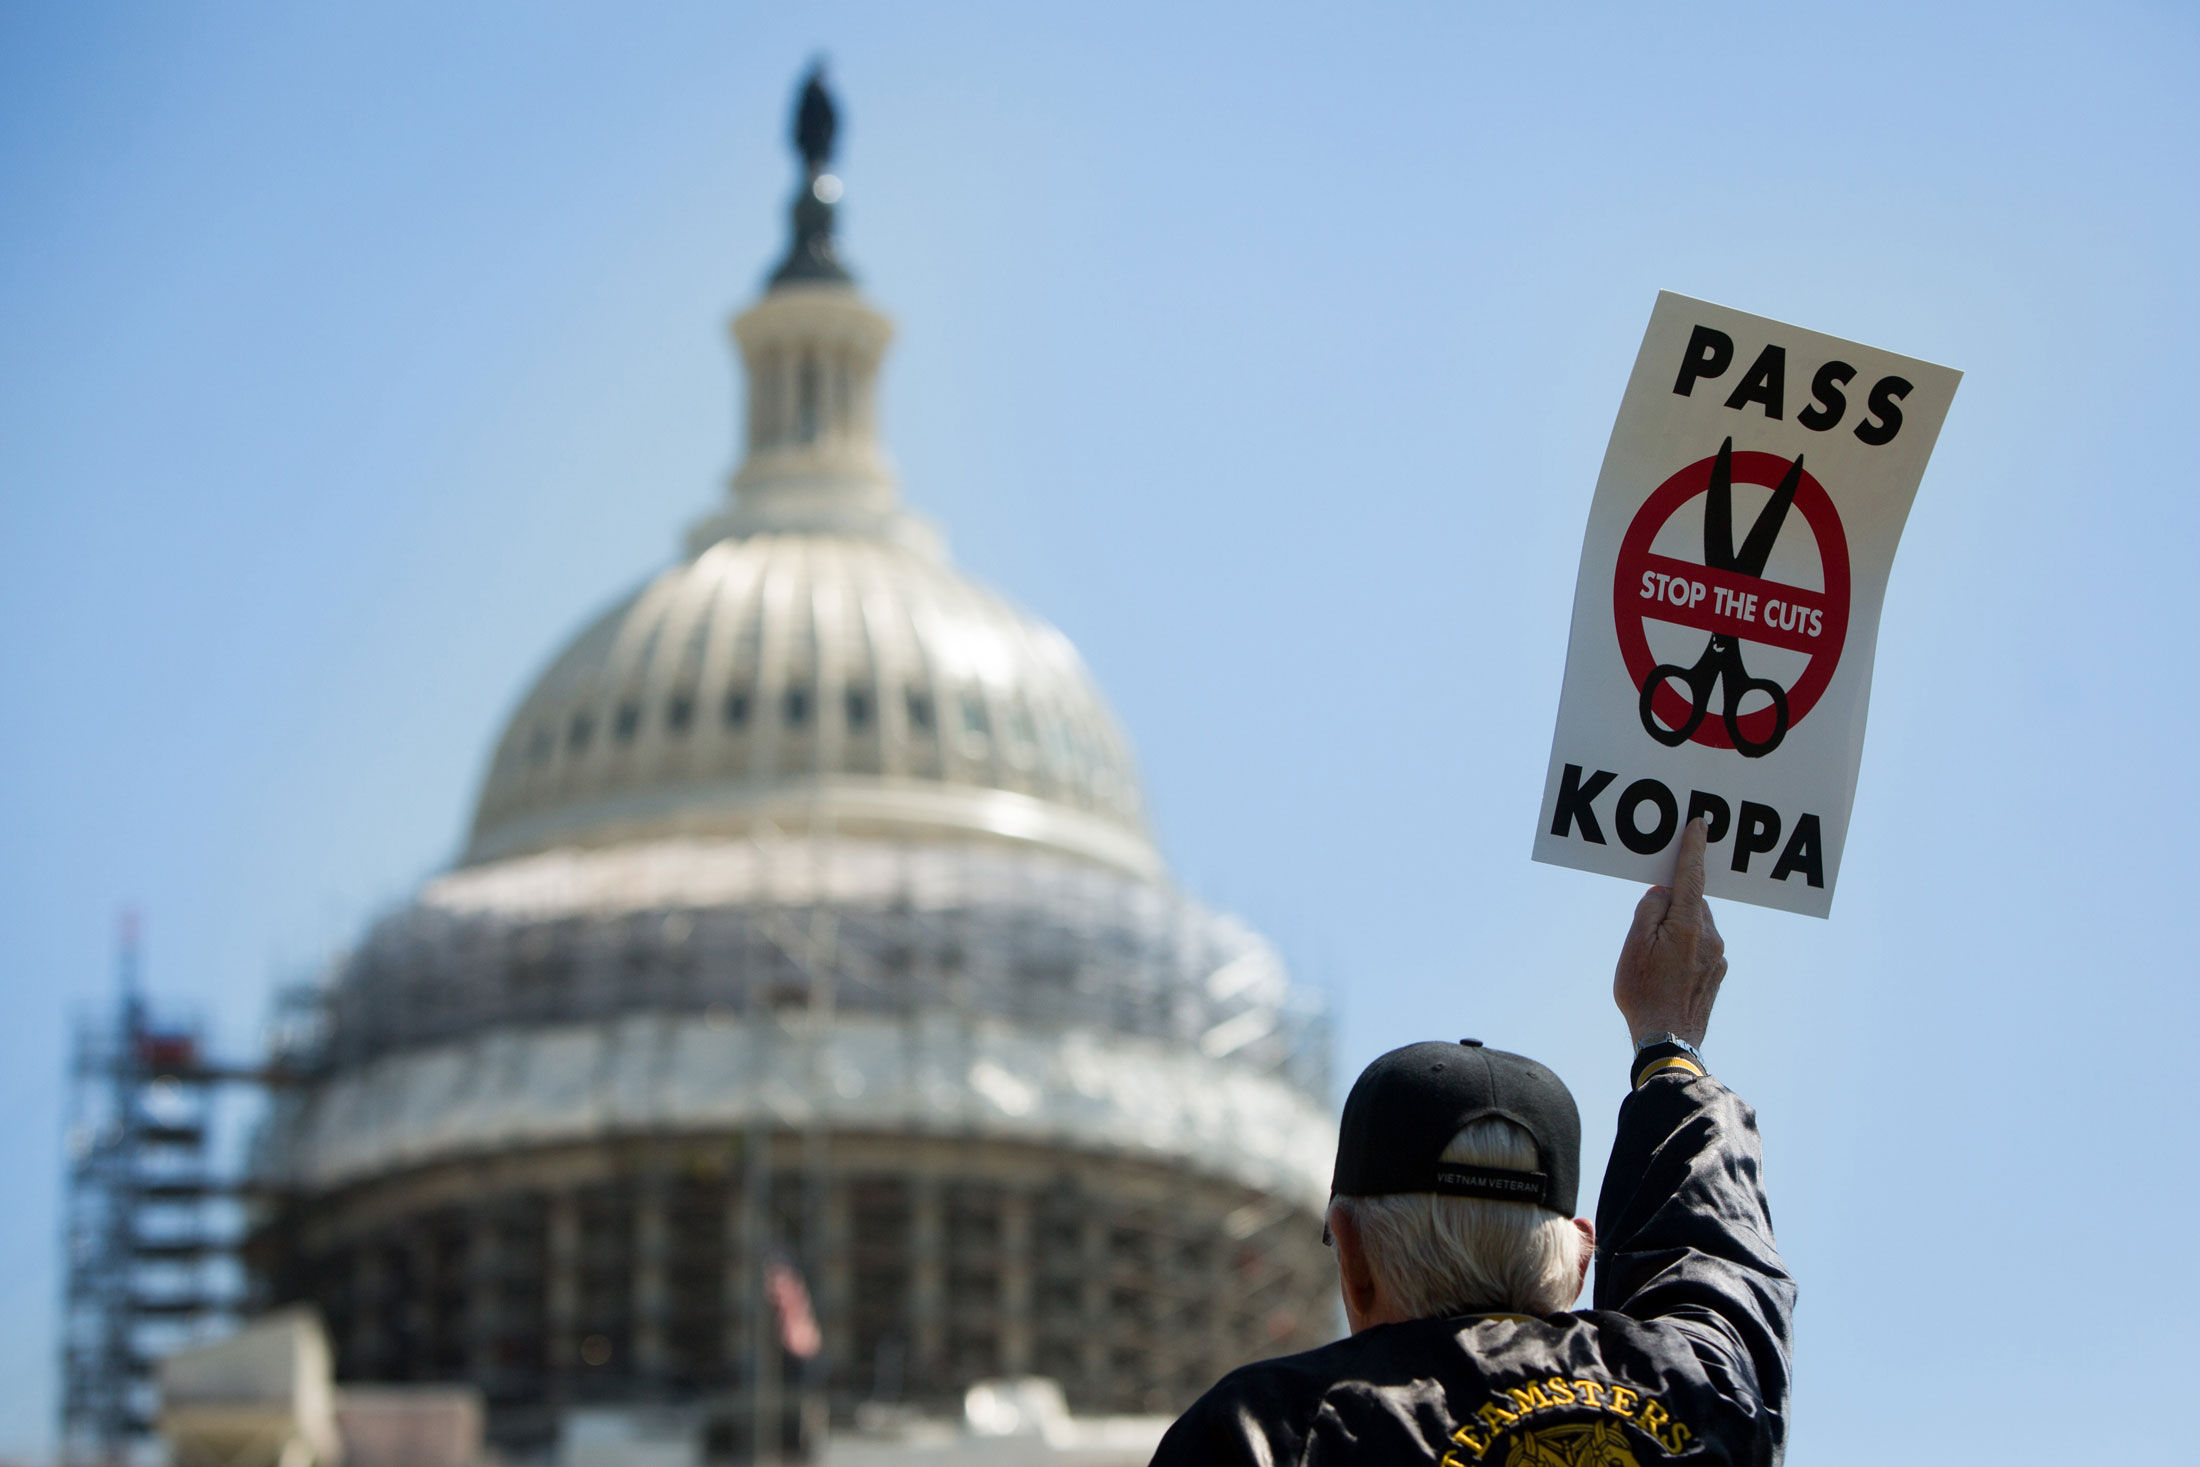 A demonstrator holds a sign at a rally to oppose cuts in pension benefits on April 14 in front of the U.S. Capitol building in Washington.
